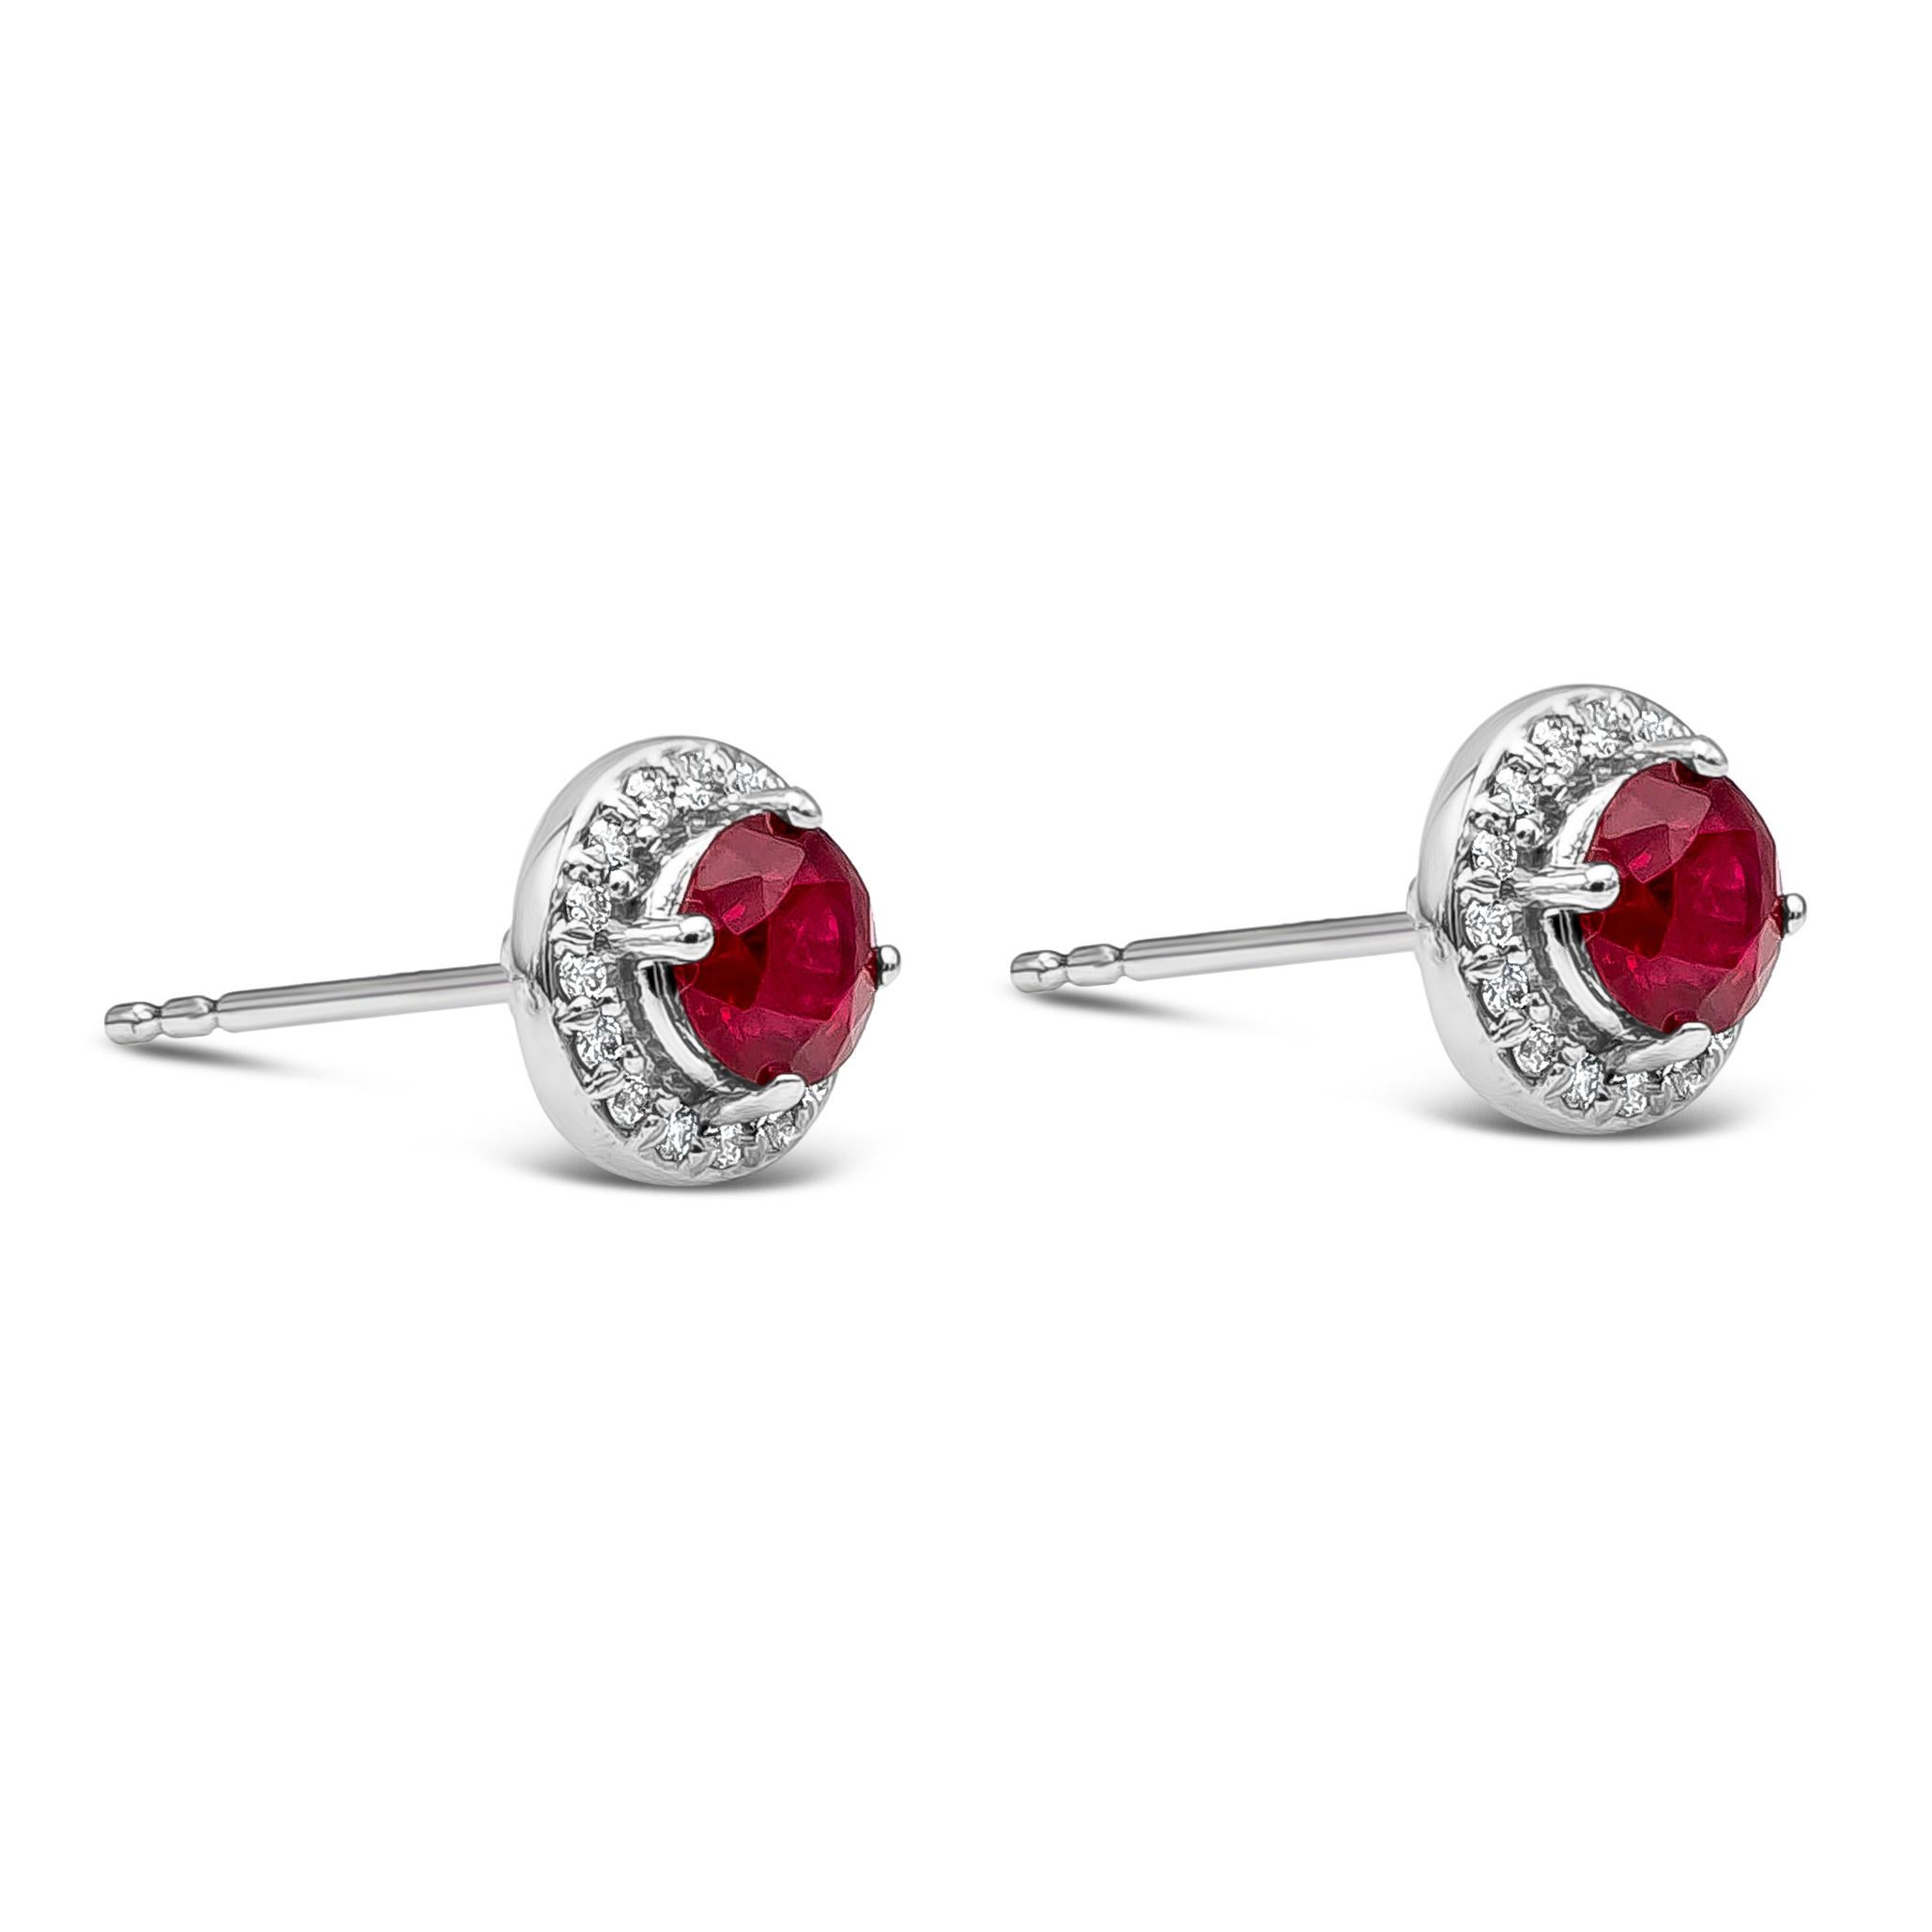 Contemporary Roman Malakov 1.35 Carats Total Round Cut Ruby and Diamond Halo Stud Earrings For Sale